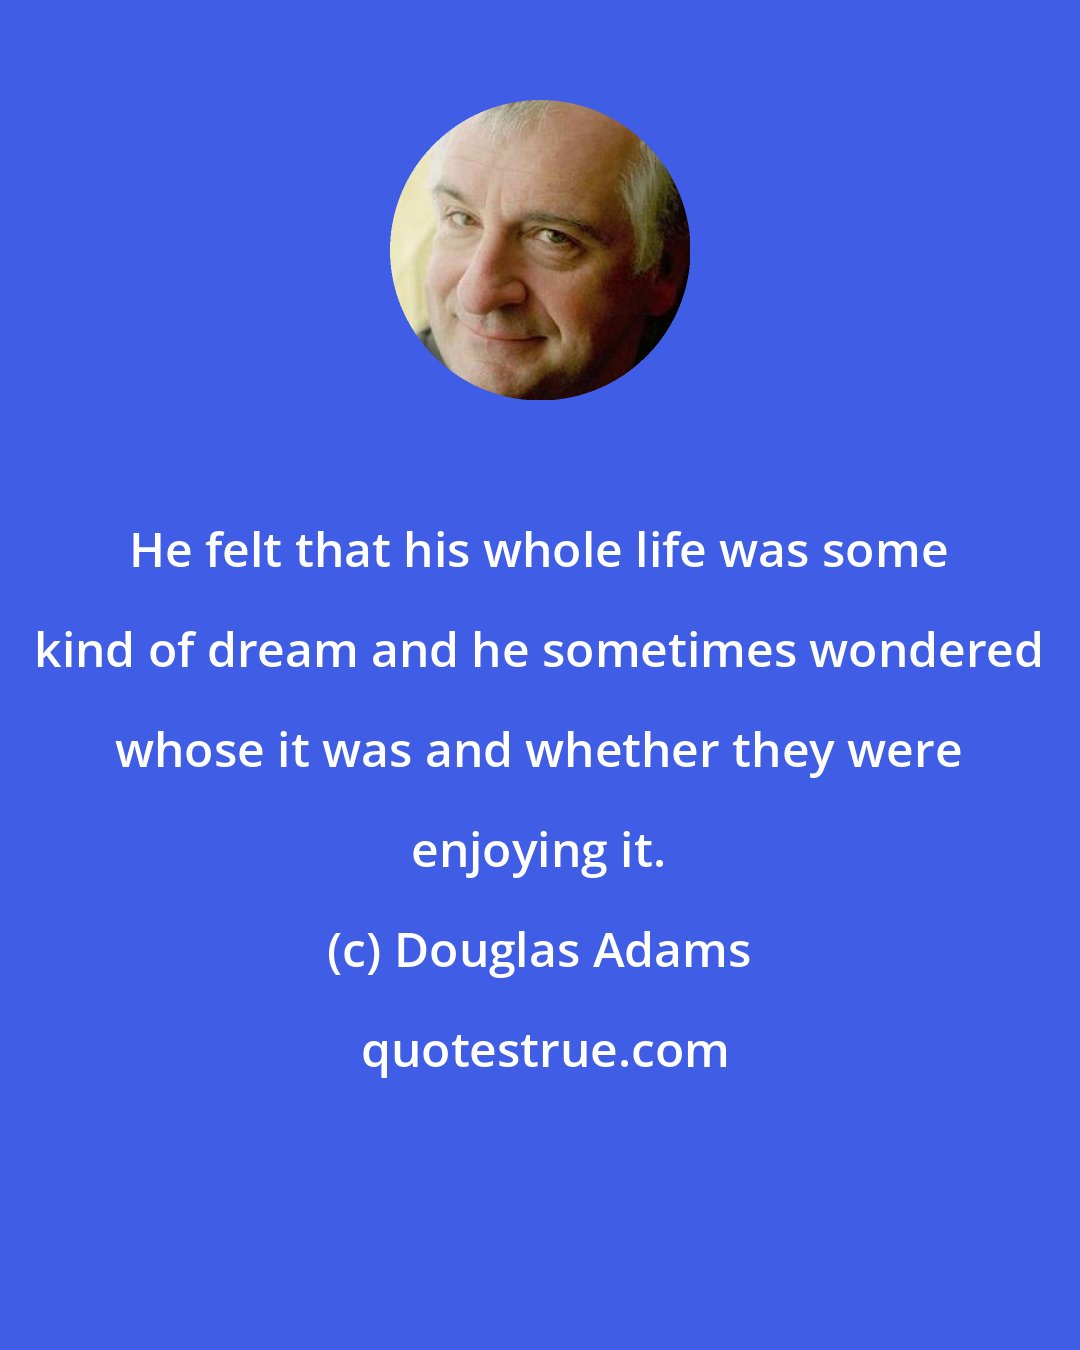 Douglas Adams: He felt that his whole life was some kind of dream and he sometimes wondered whose it was and whether they were enjoying it.